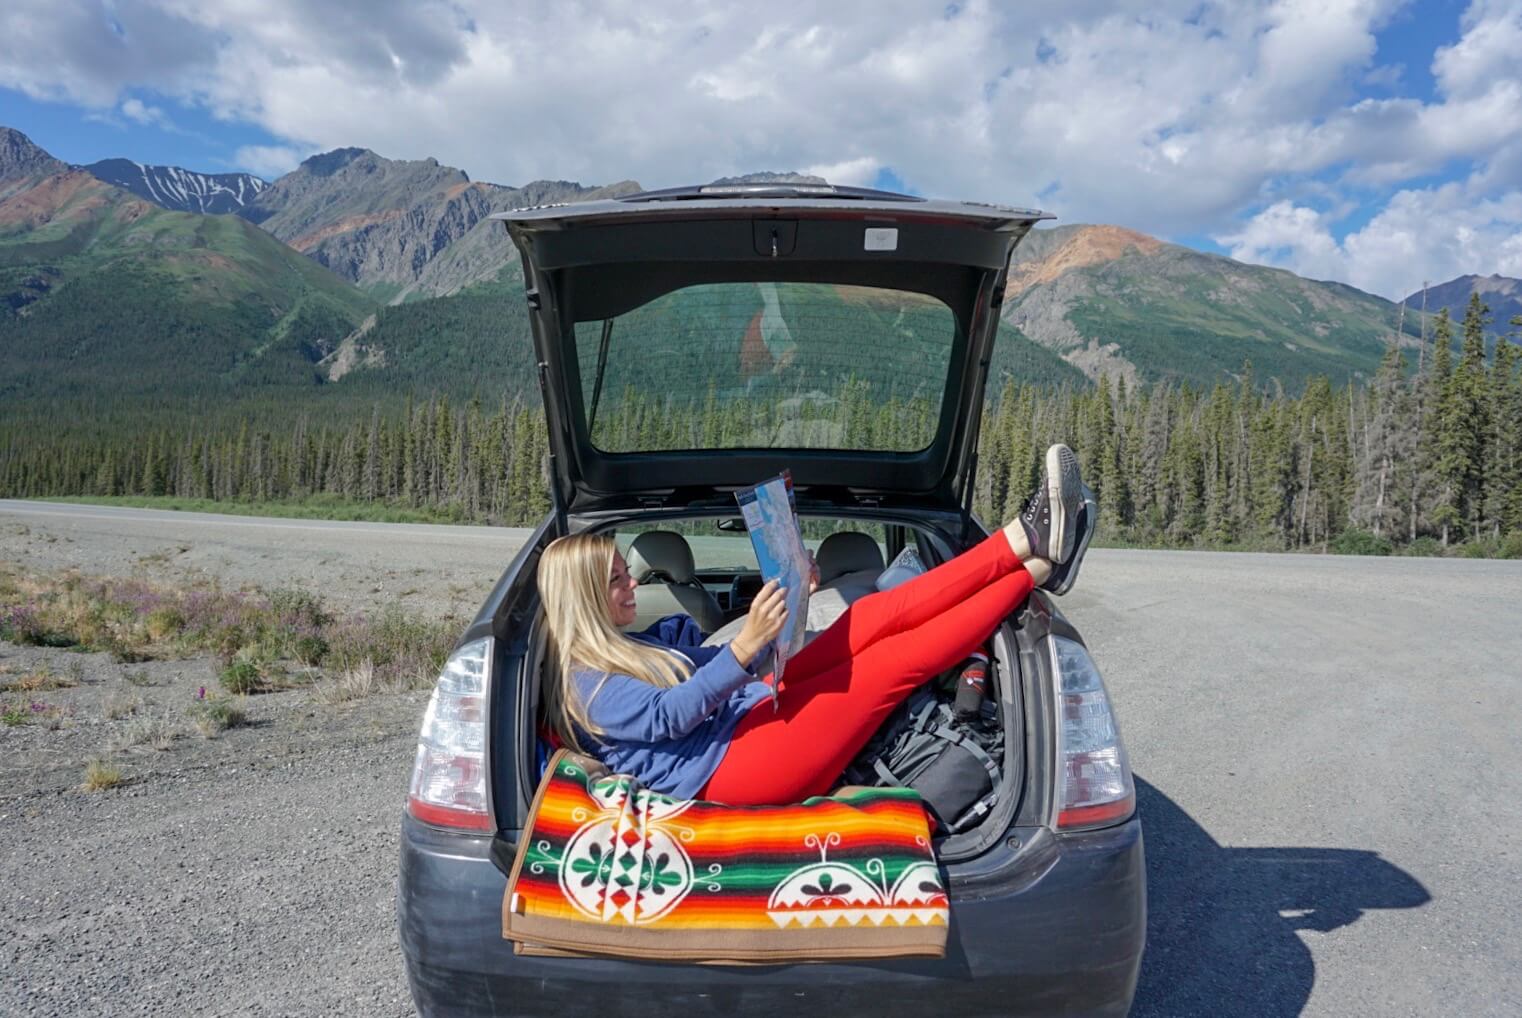 Here is a list of places that I sleep for FREE while road tripping in my car. Save tons of money while traveling and give it a try!